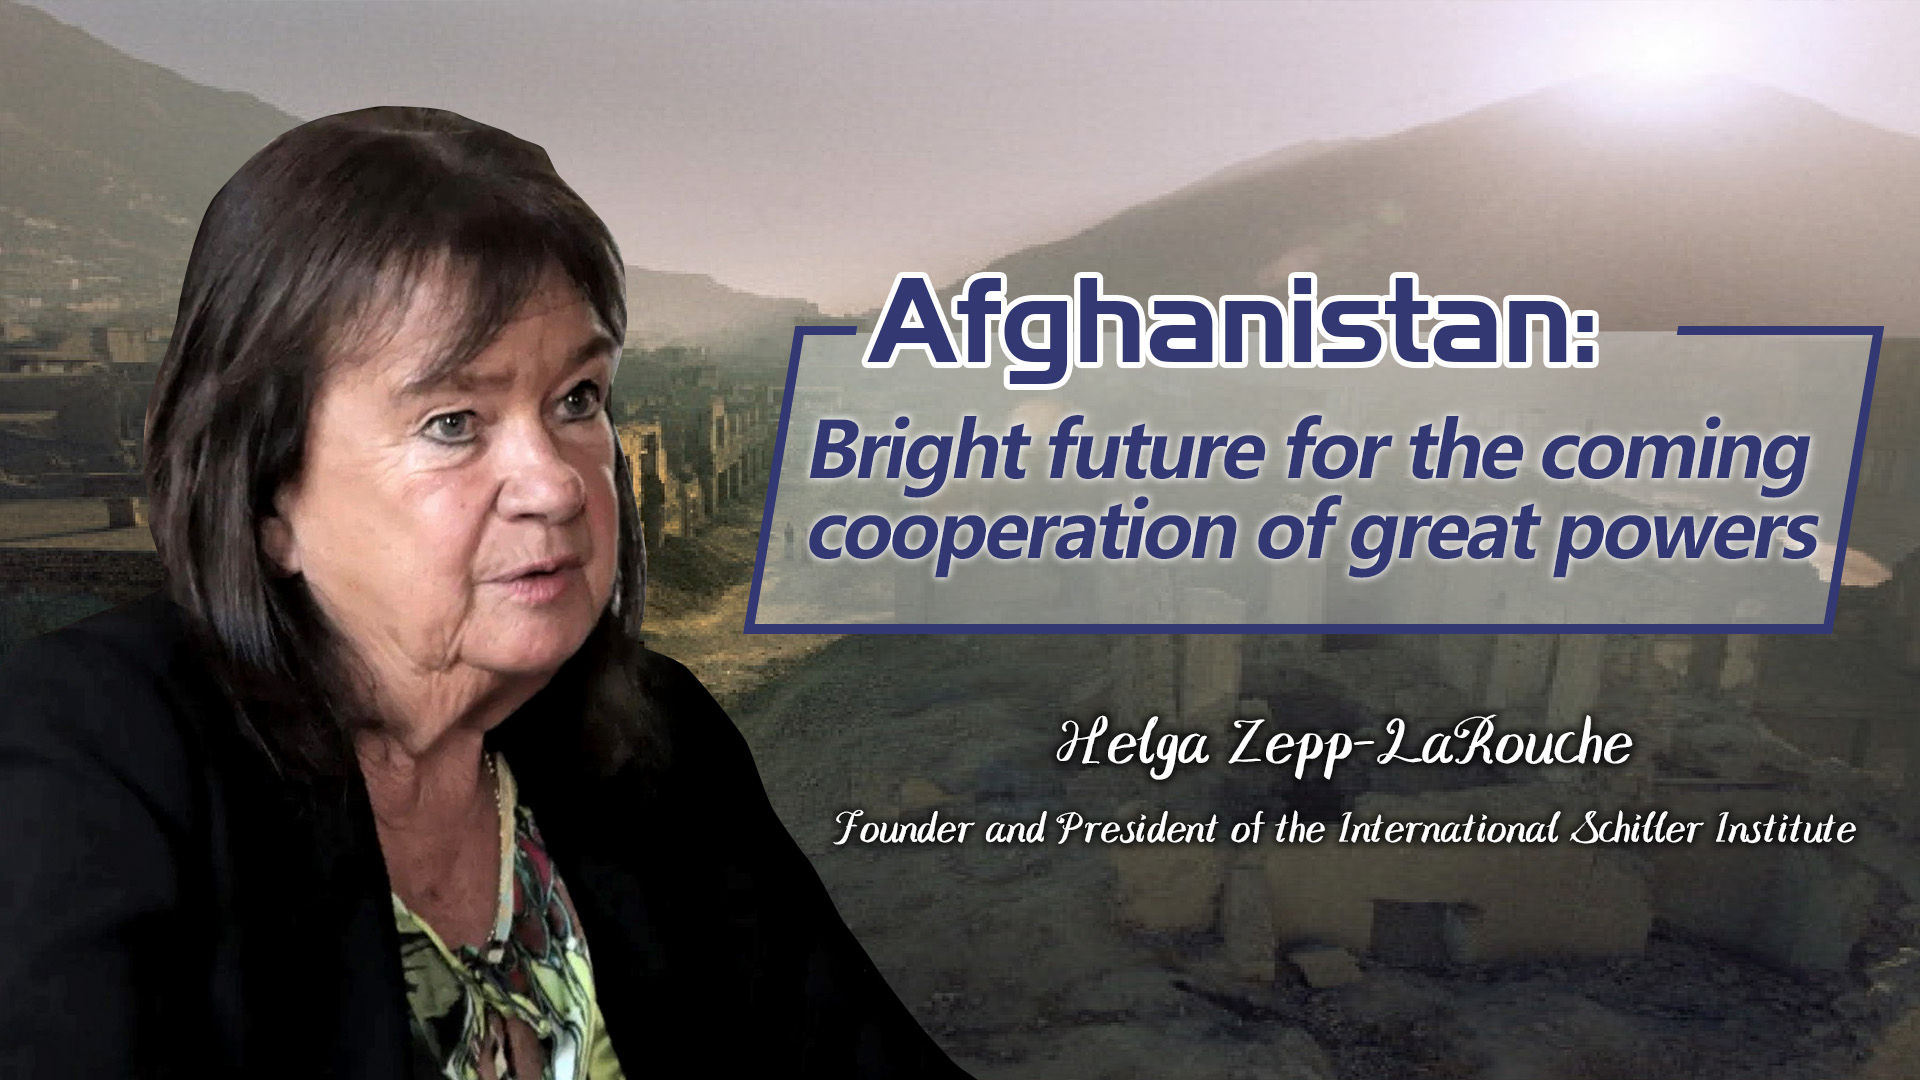 https://news.cgtn.com/news/2021-08-20/Afghanistan-Bright-future-for-the-coming-cooperation-of-great-powers-12QYAxWPJe0/index.html